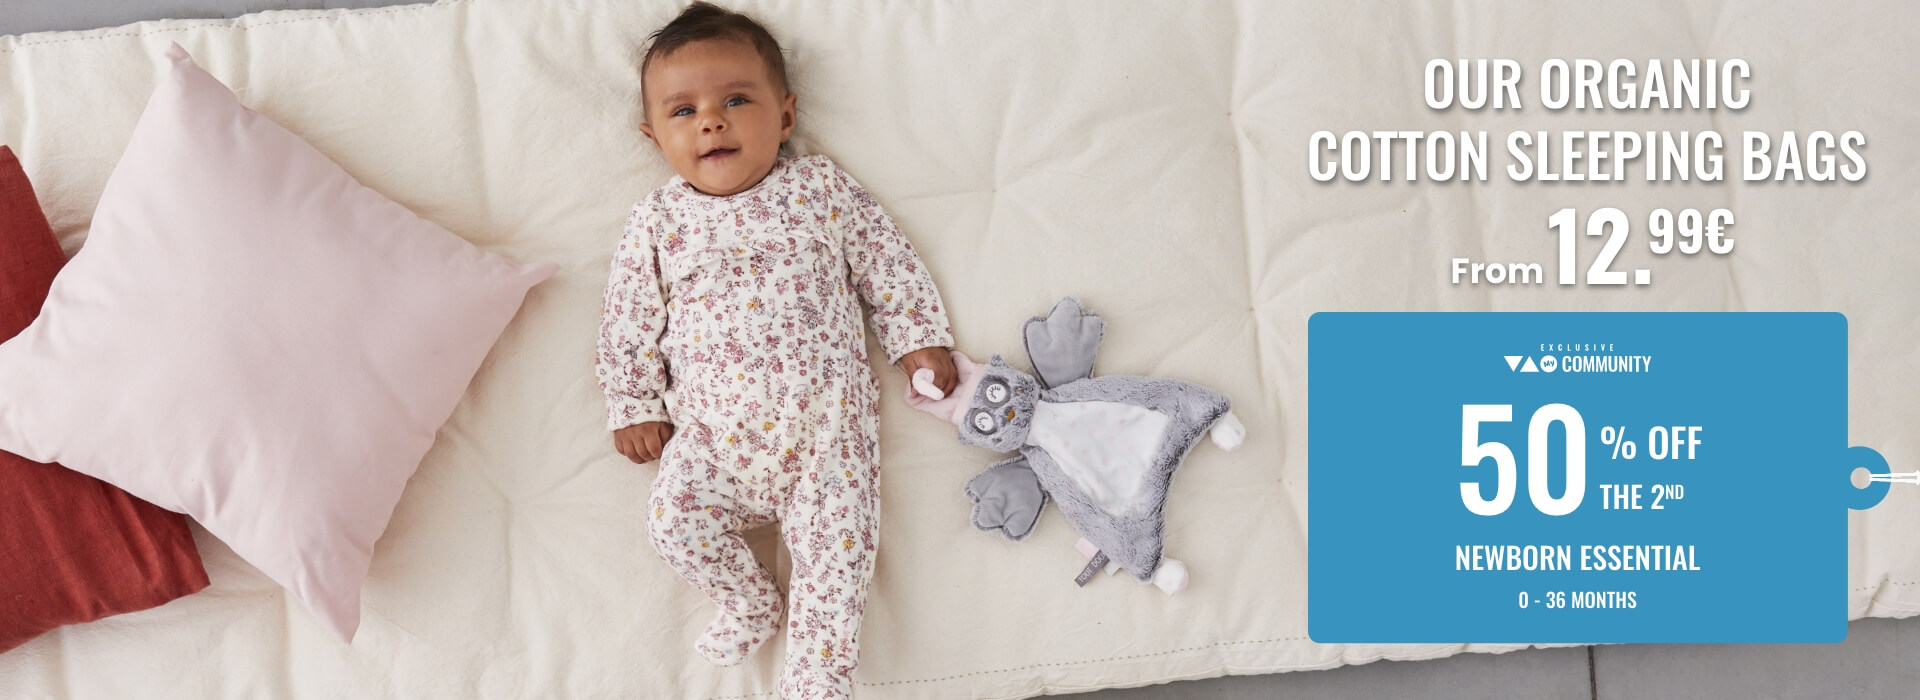 Our organic cotton sleeping bags from €12.99